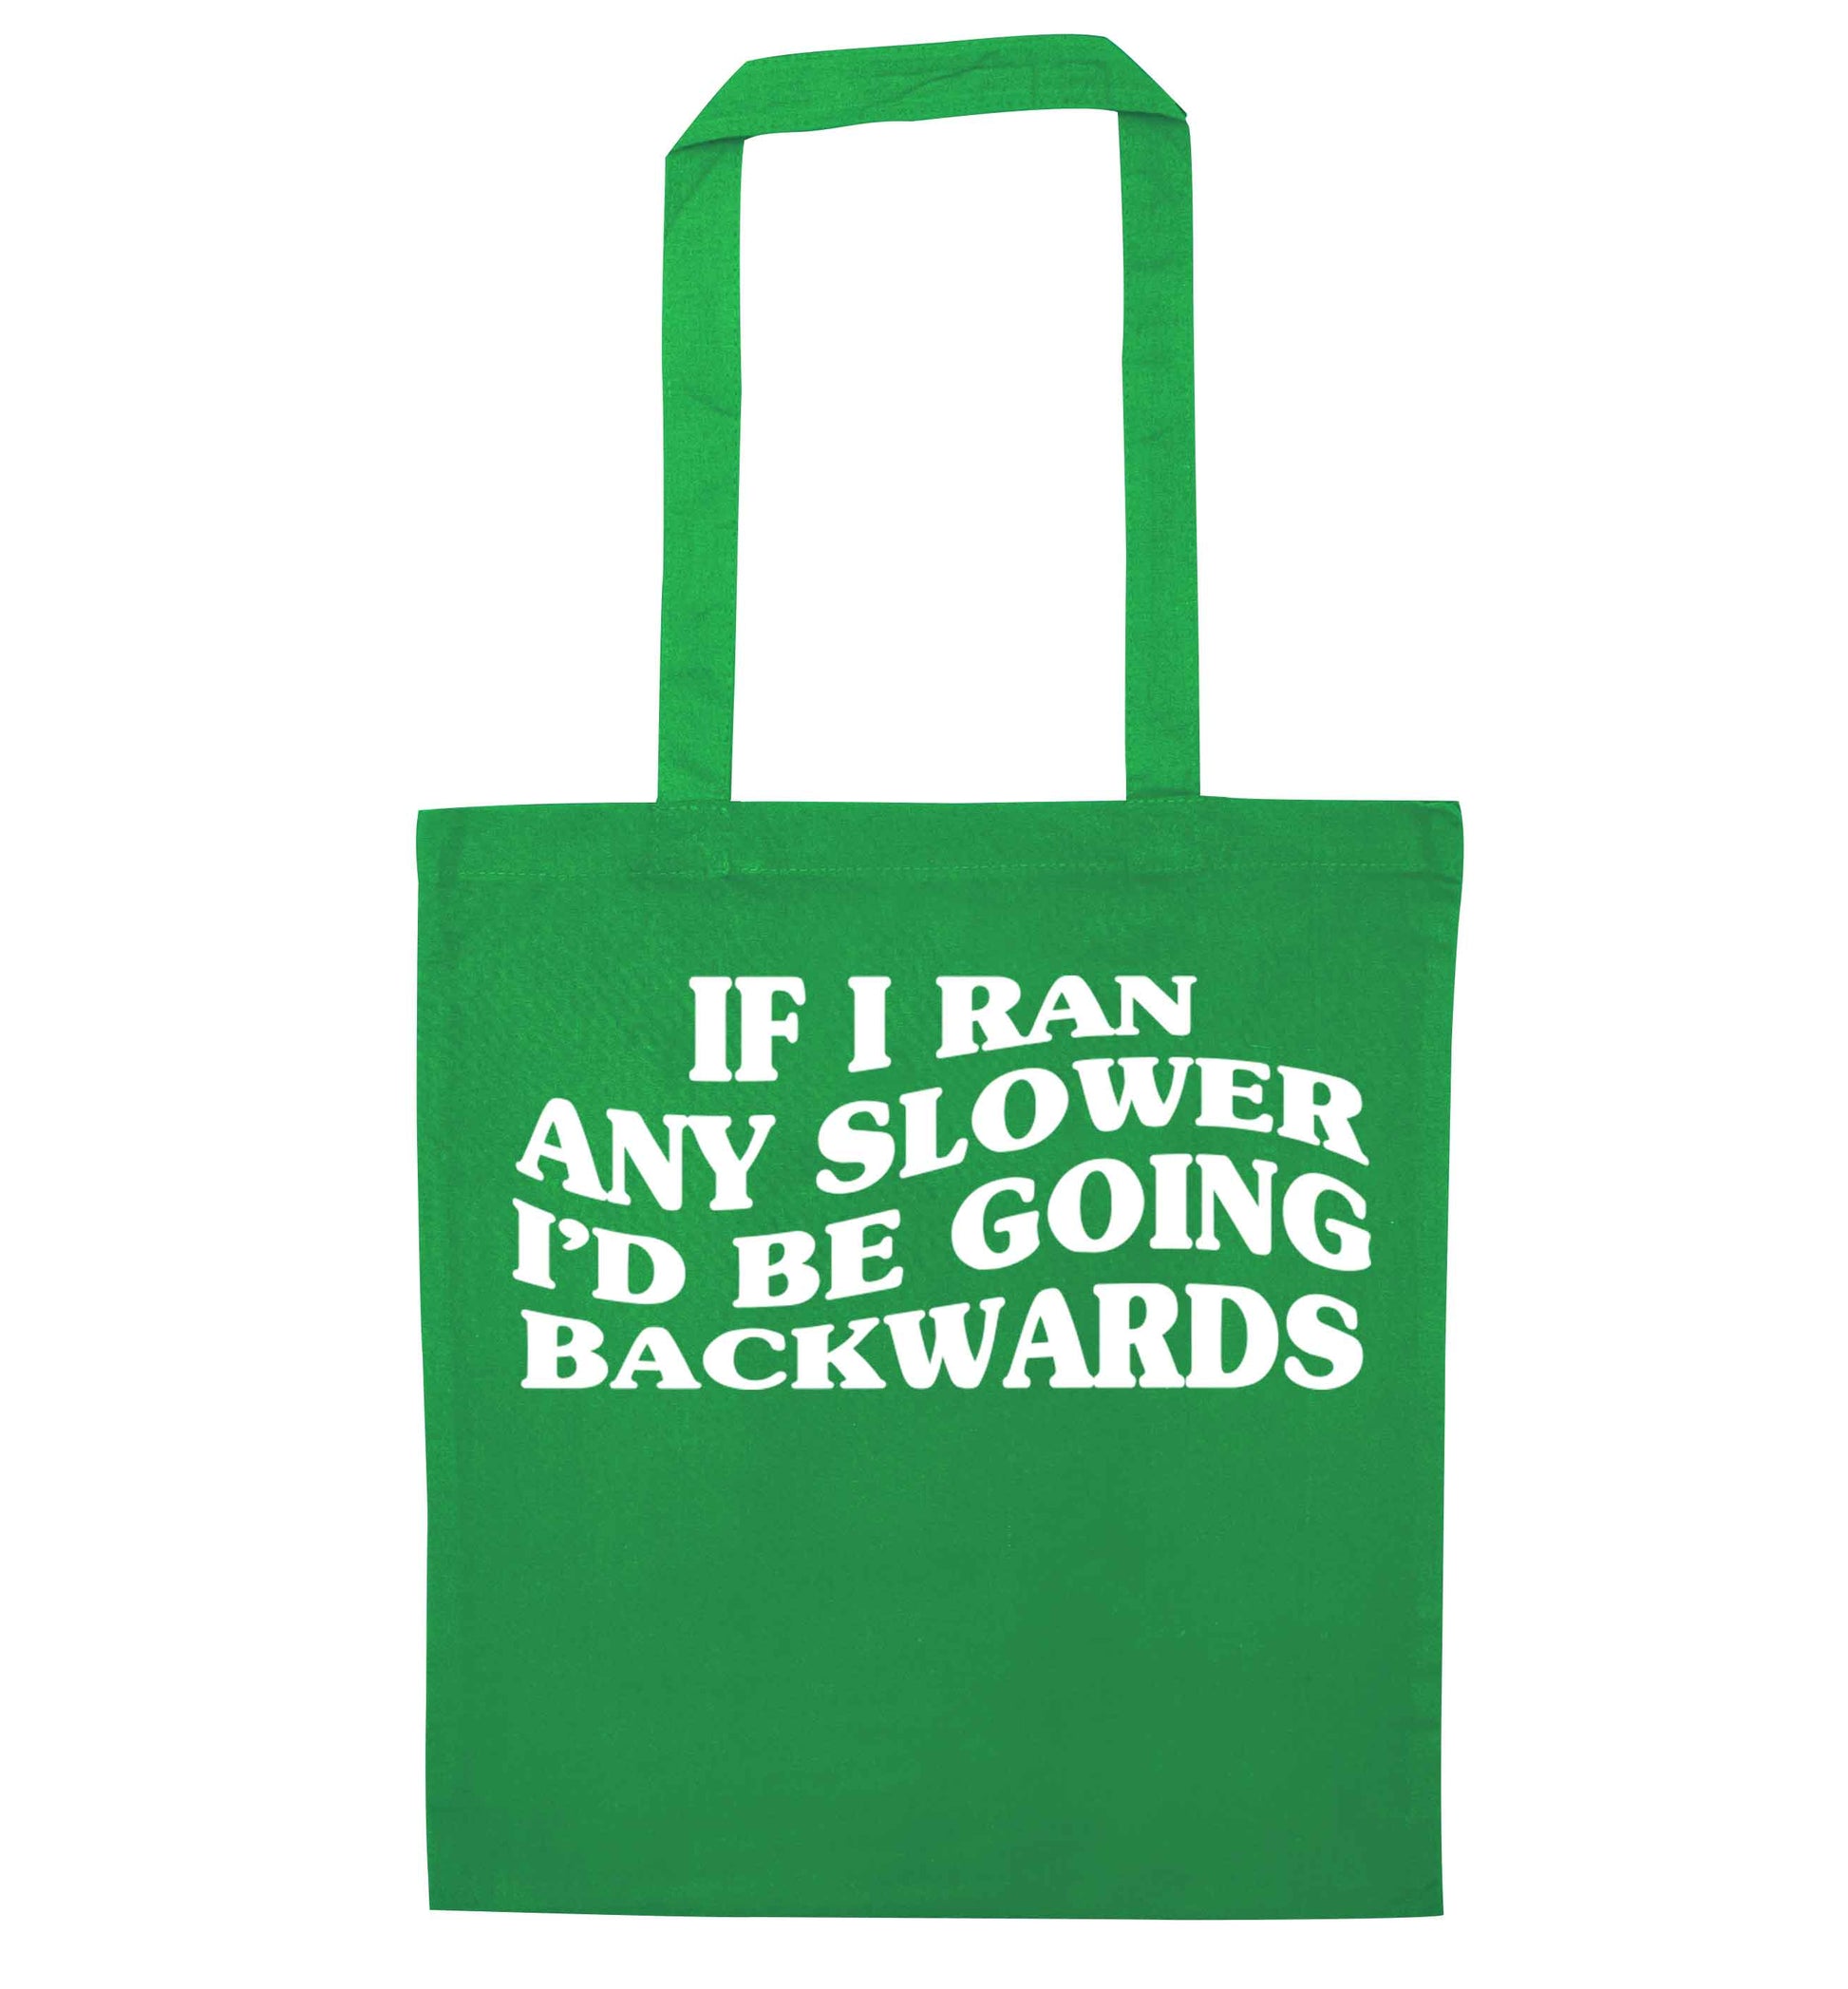 If I ran any slower I'd be going backwards green tote bag